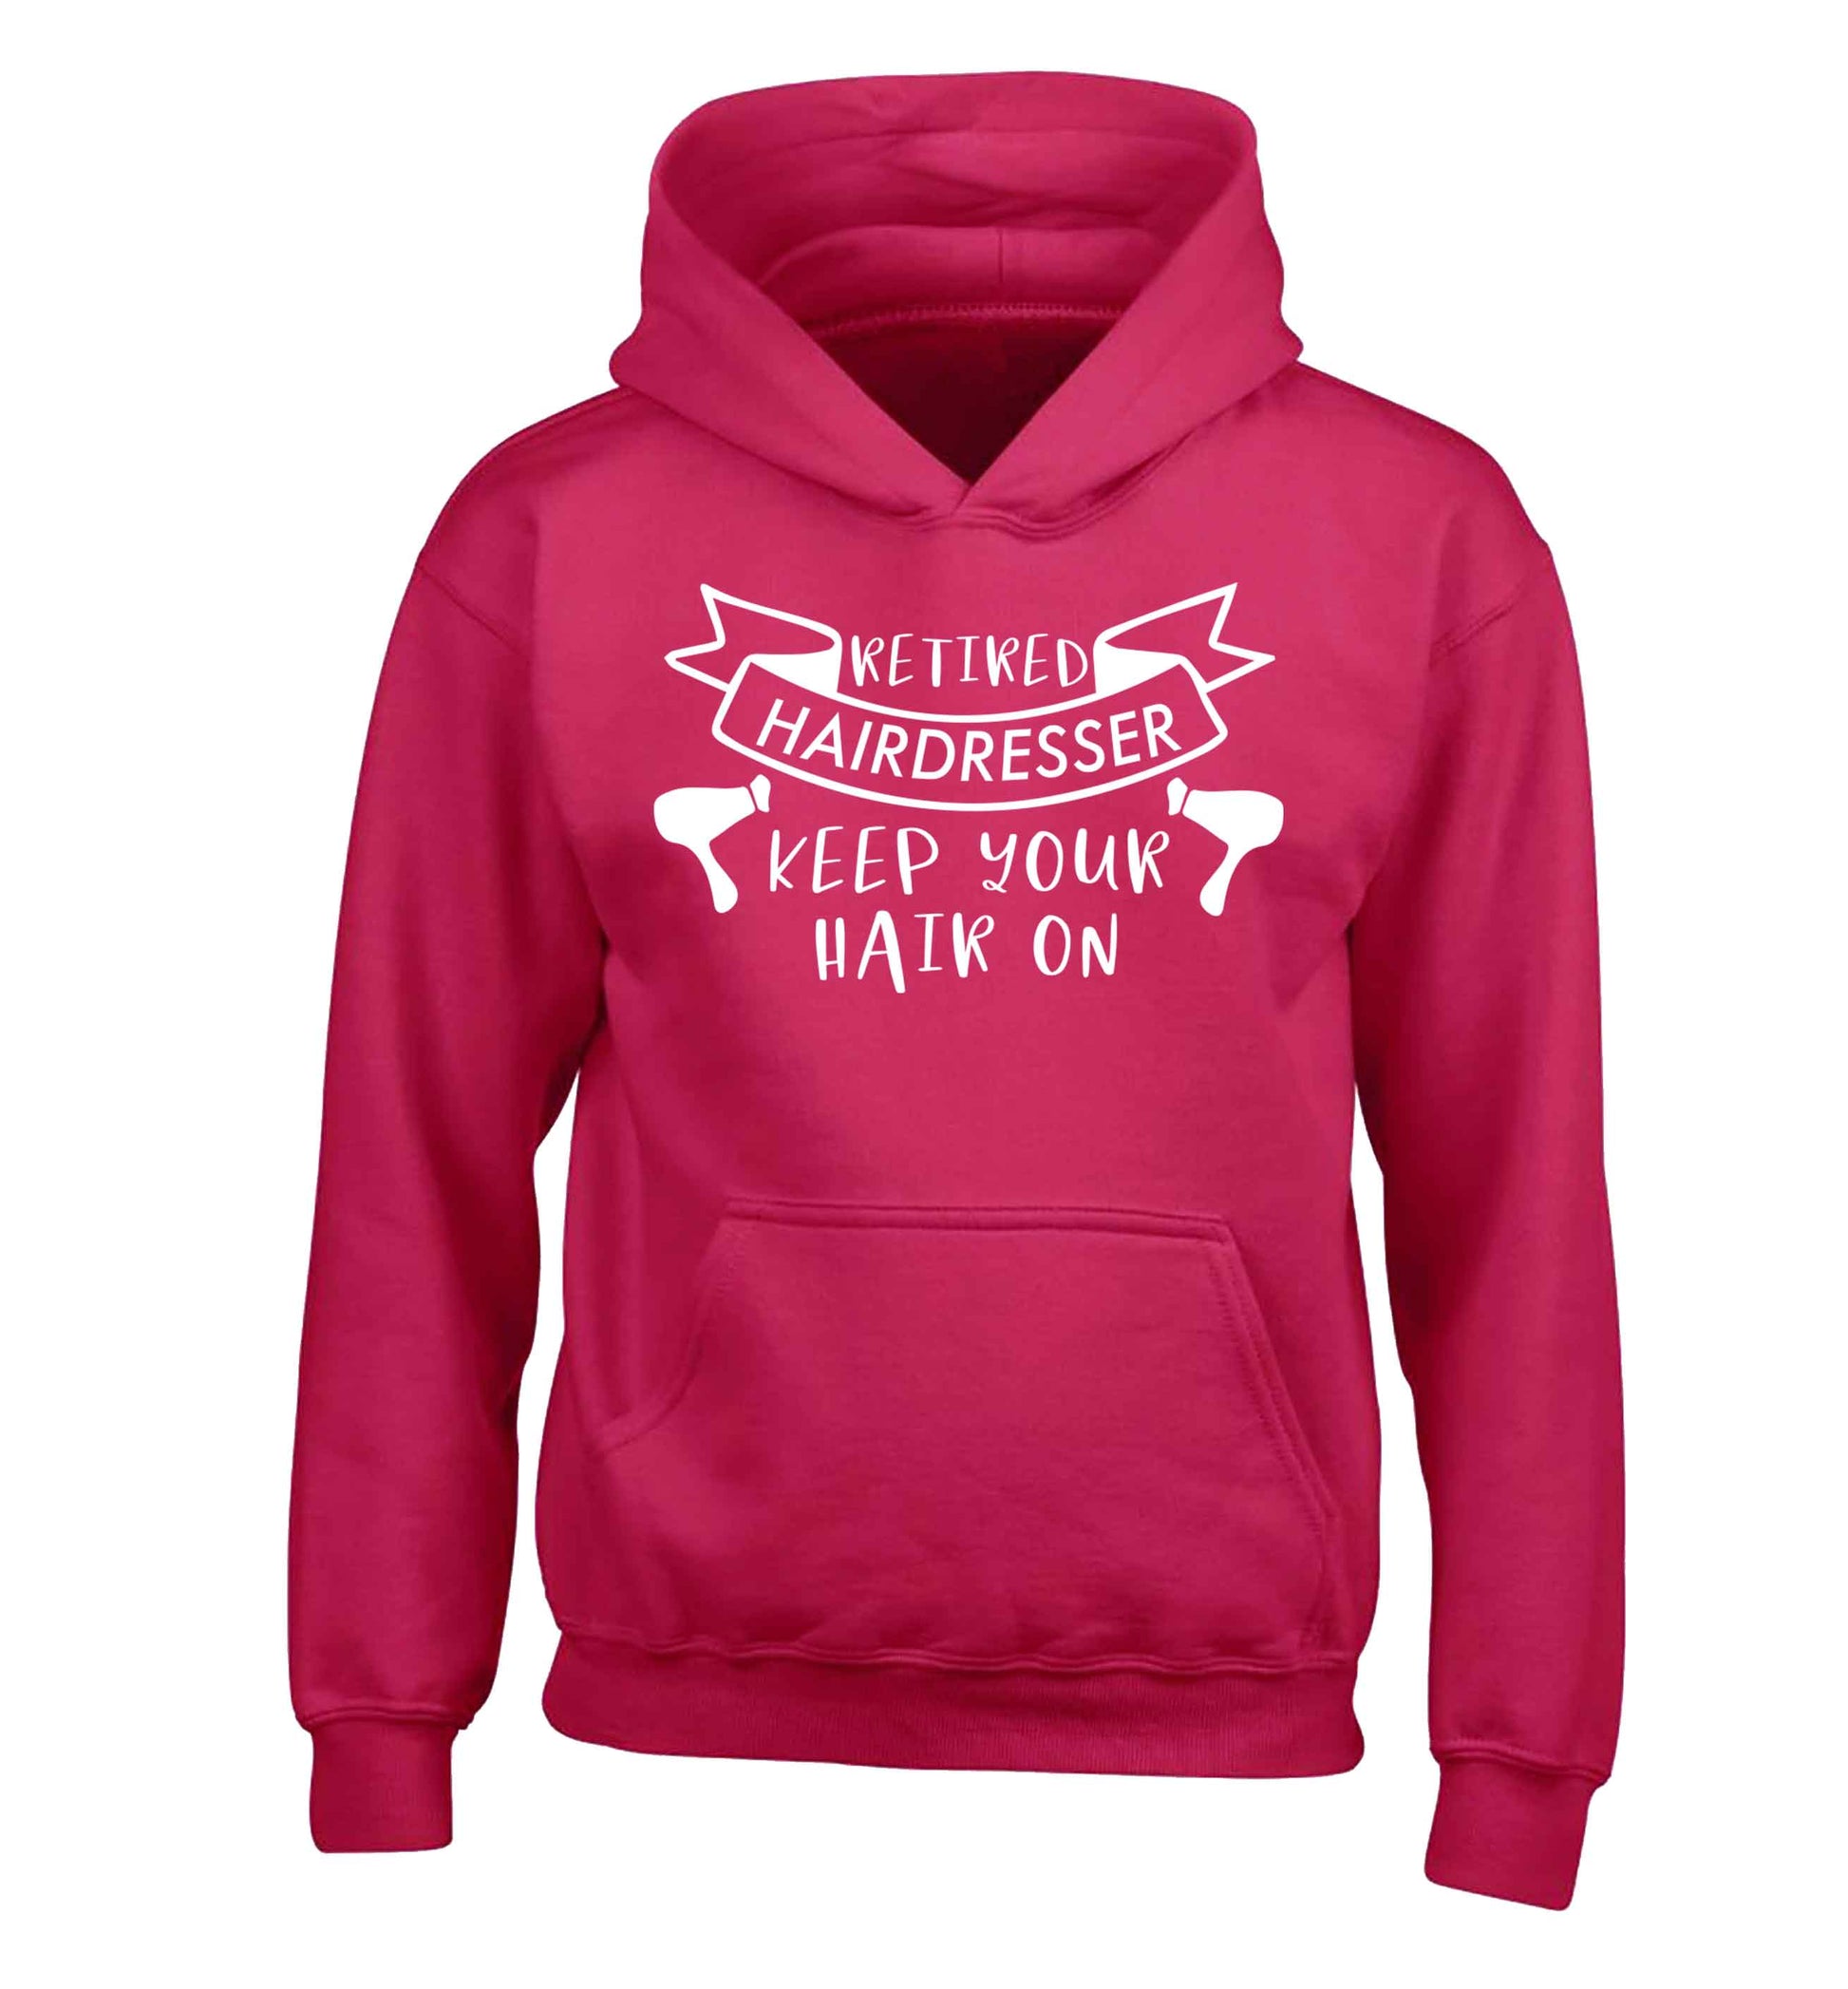 Retired hairdresser keep your hair on children's pink hoodie 12-13 Years